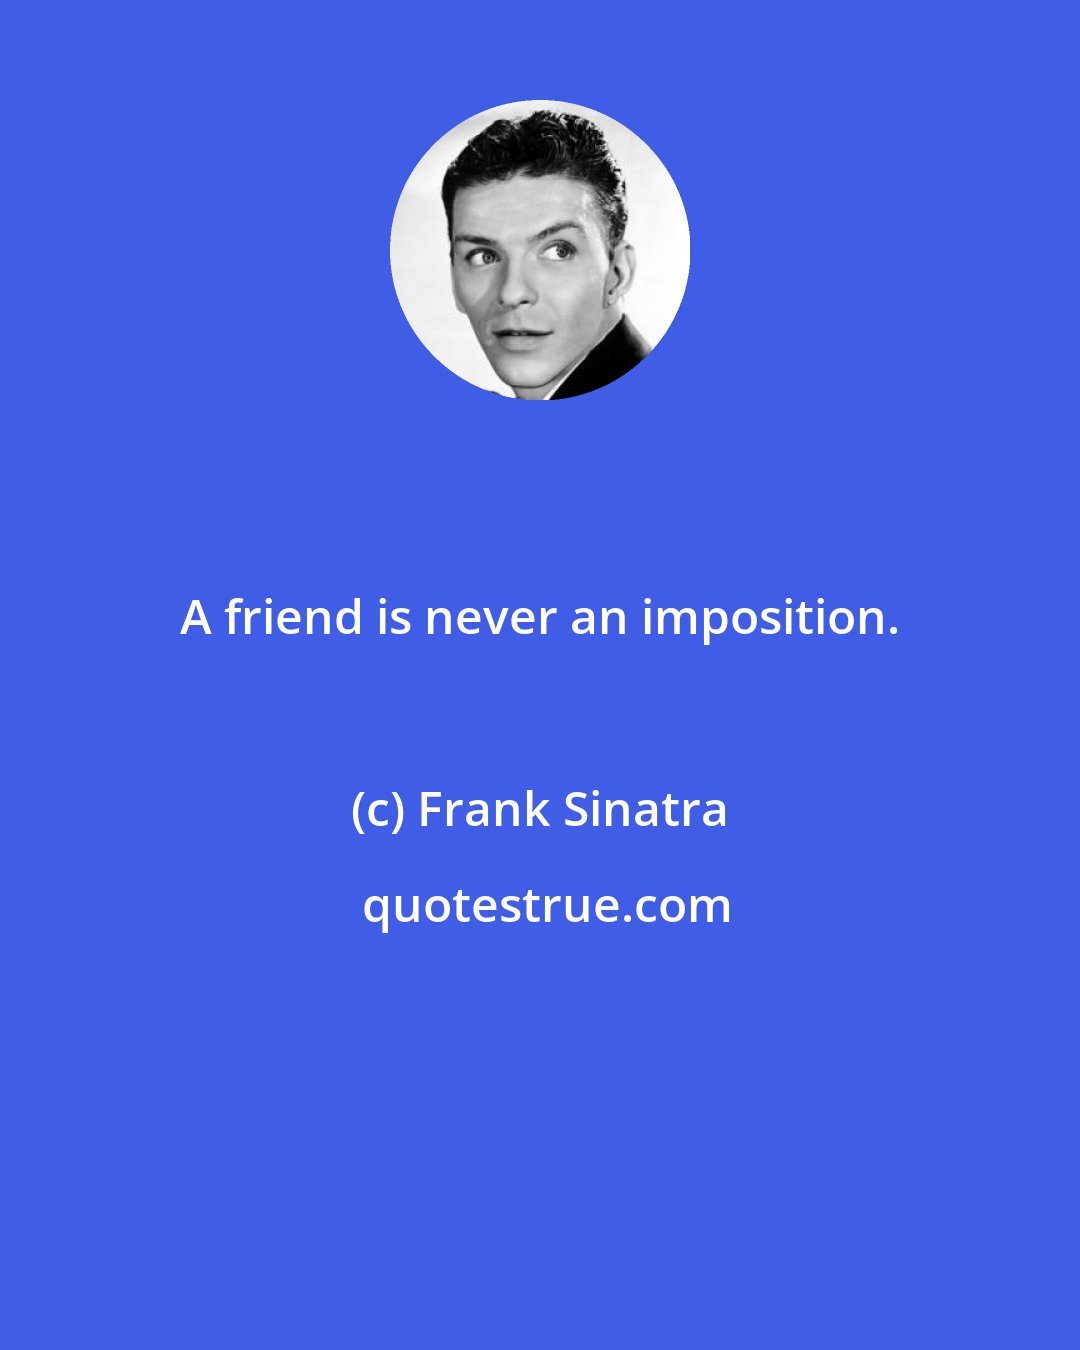 Frank Sinatra: A friend is never an imposition.